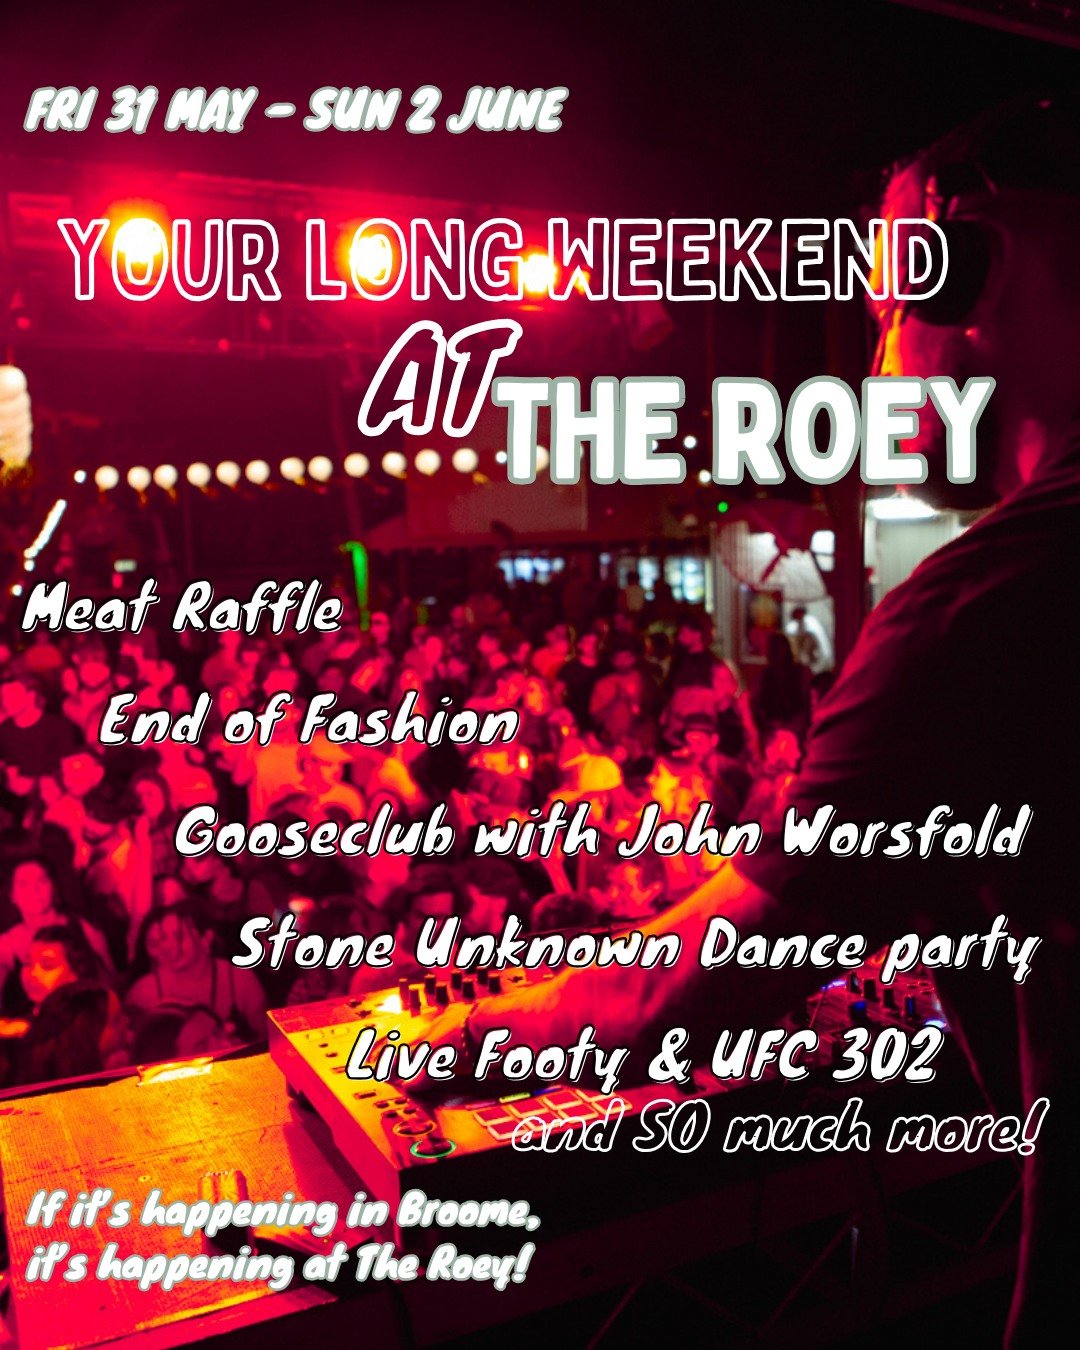 Here's your WA Day LONG WEEKEND at The Roey 👇🏽😎

TONIGHT 👉🏽 Meat Raffle tickets from 5pm, drawn 7pm

Friday Footy 🏉 MAGPIES vs BULLDOGS on the BIG SCREEN in Oasis from 5.30pm

END OF FASHION 🤘🏽🎸 from 8pm in Oasis! Don't miss these multi ARIA